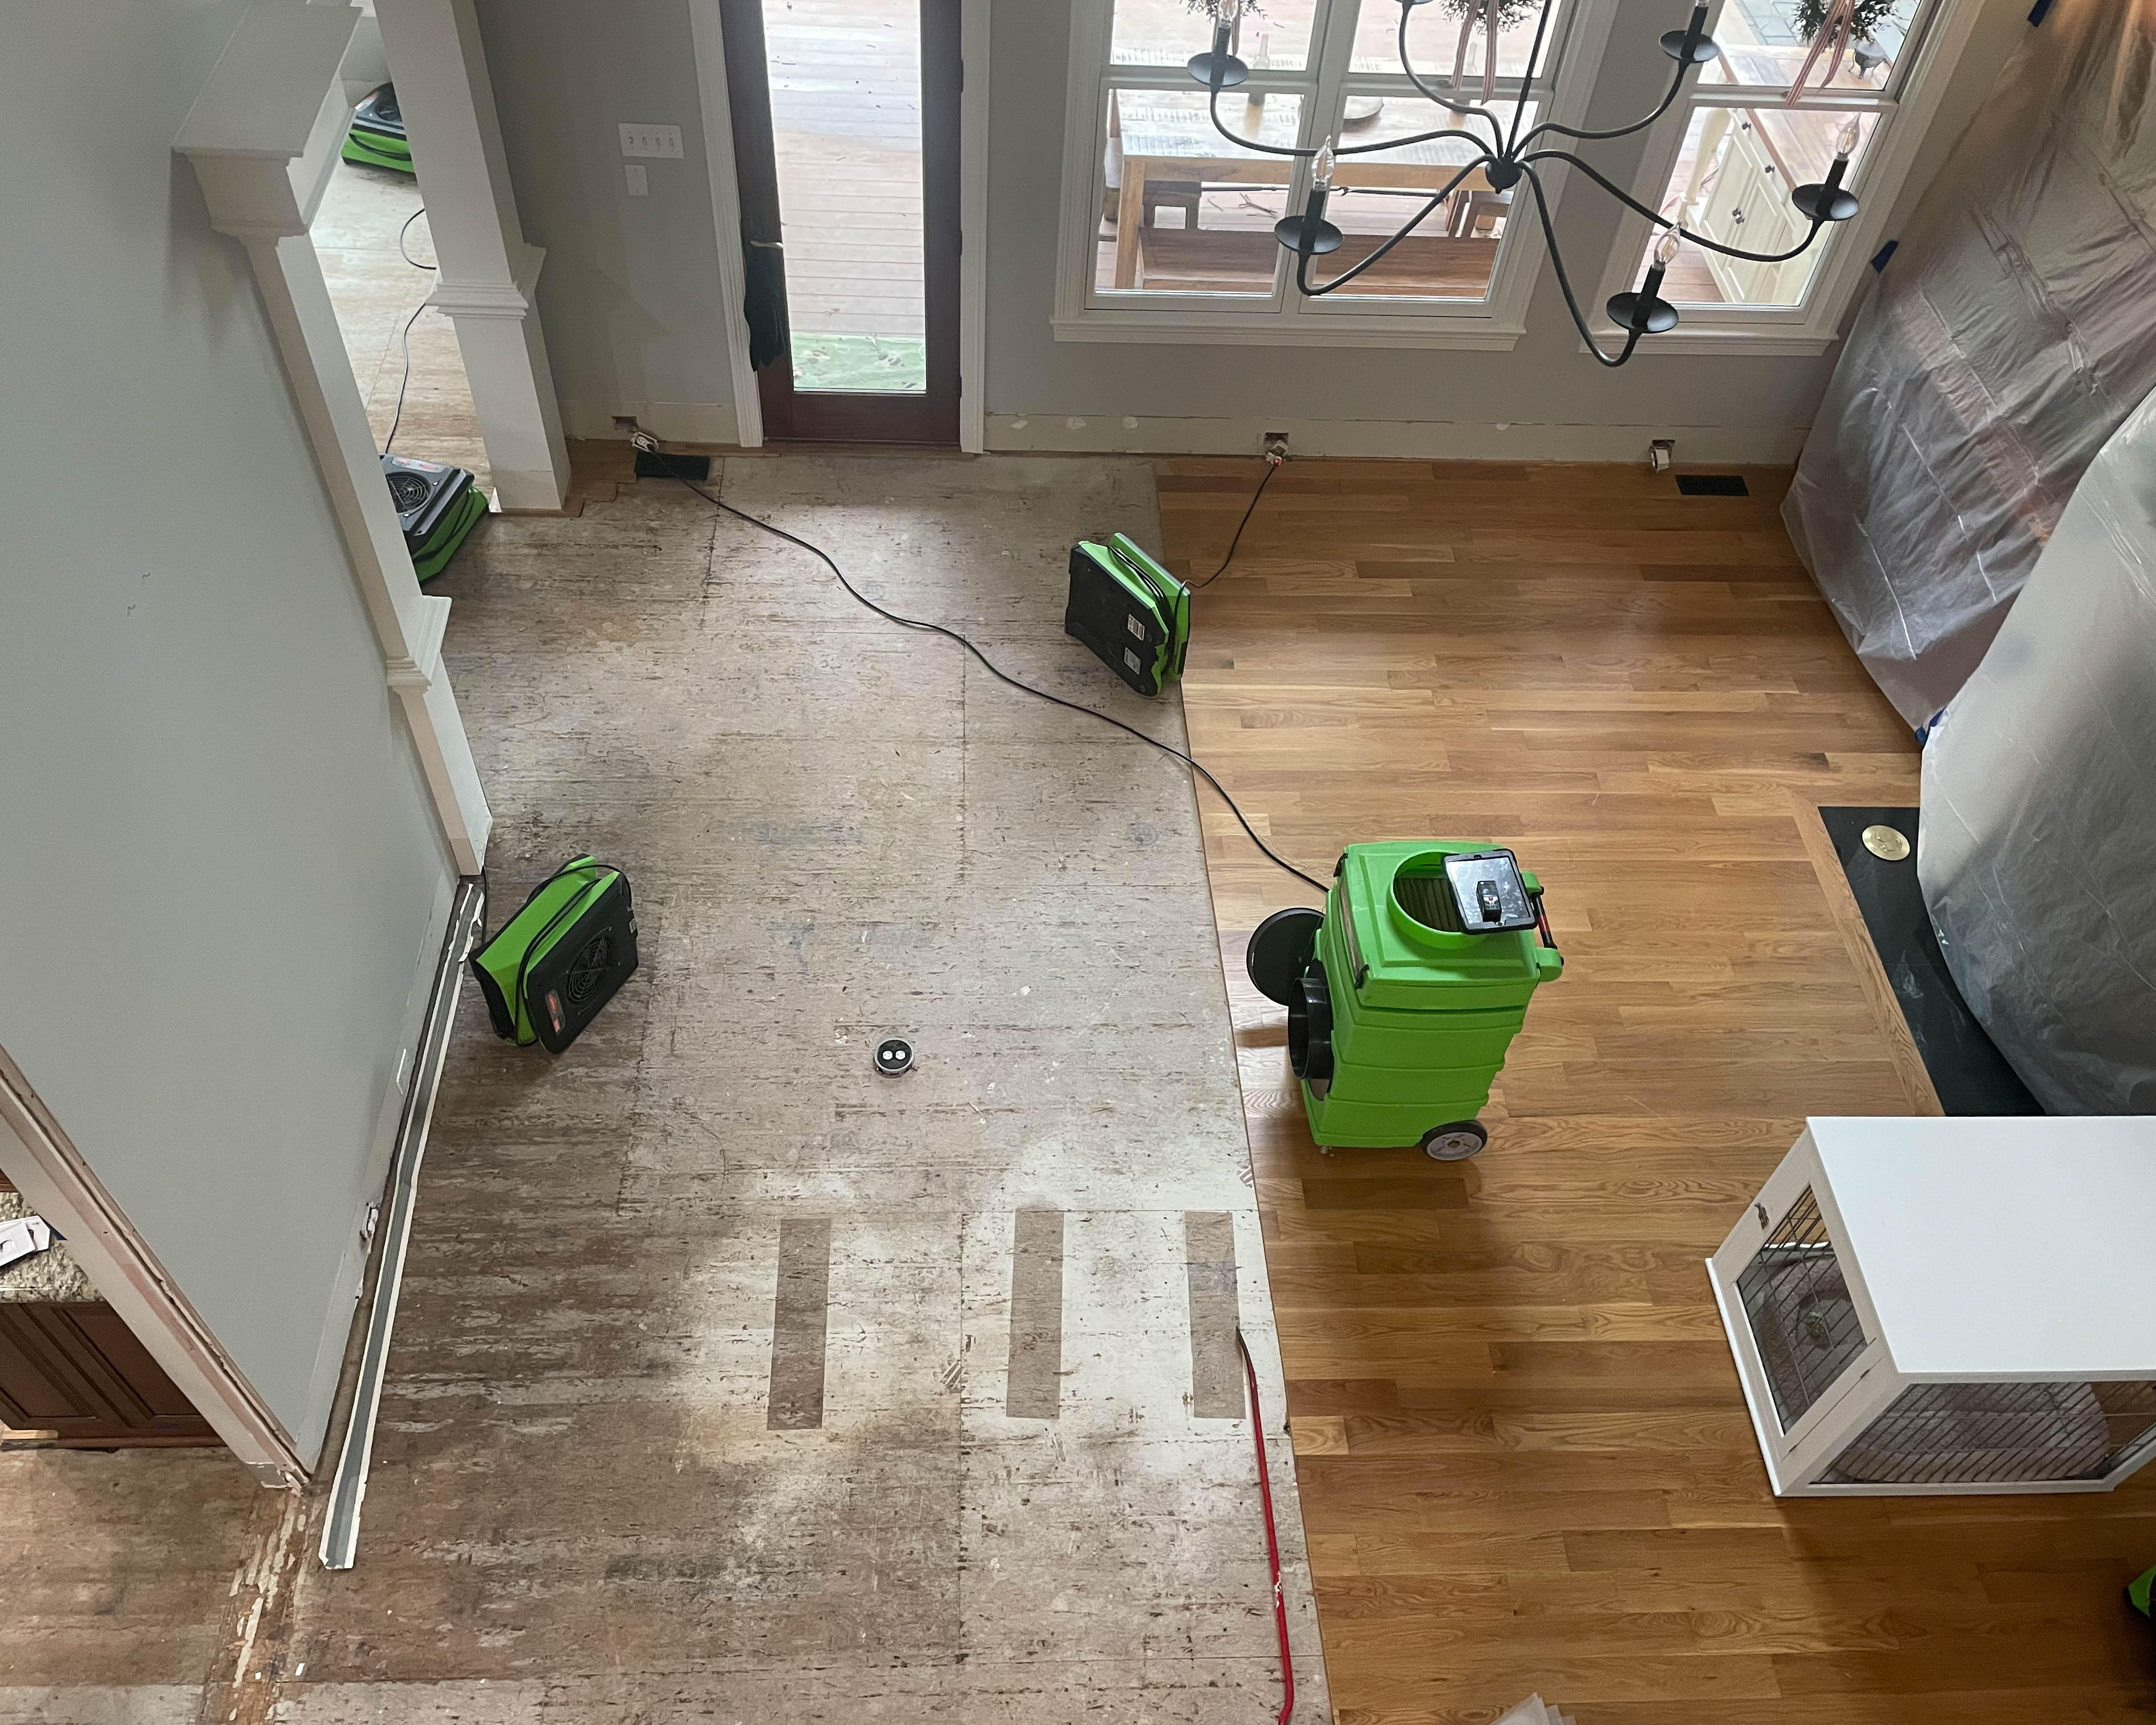 There is no loss that our SERVPRO of West Knoxville in Farragut, TN can't handle, no matter how big or small! For fire, water, mold damage cleanup and restoration needs, contact the disaster restoration experts today!